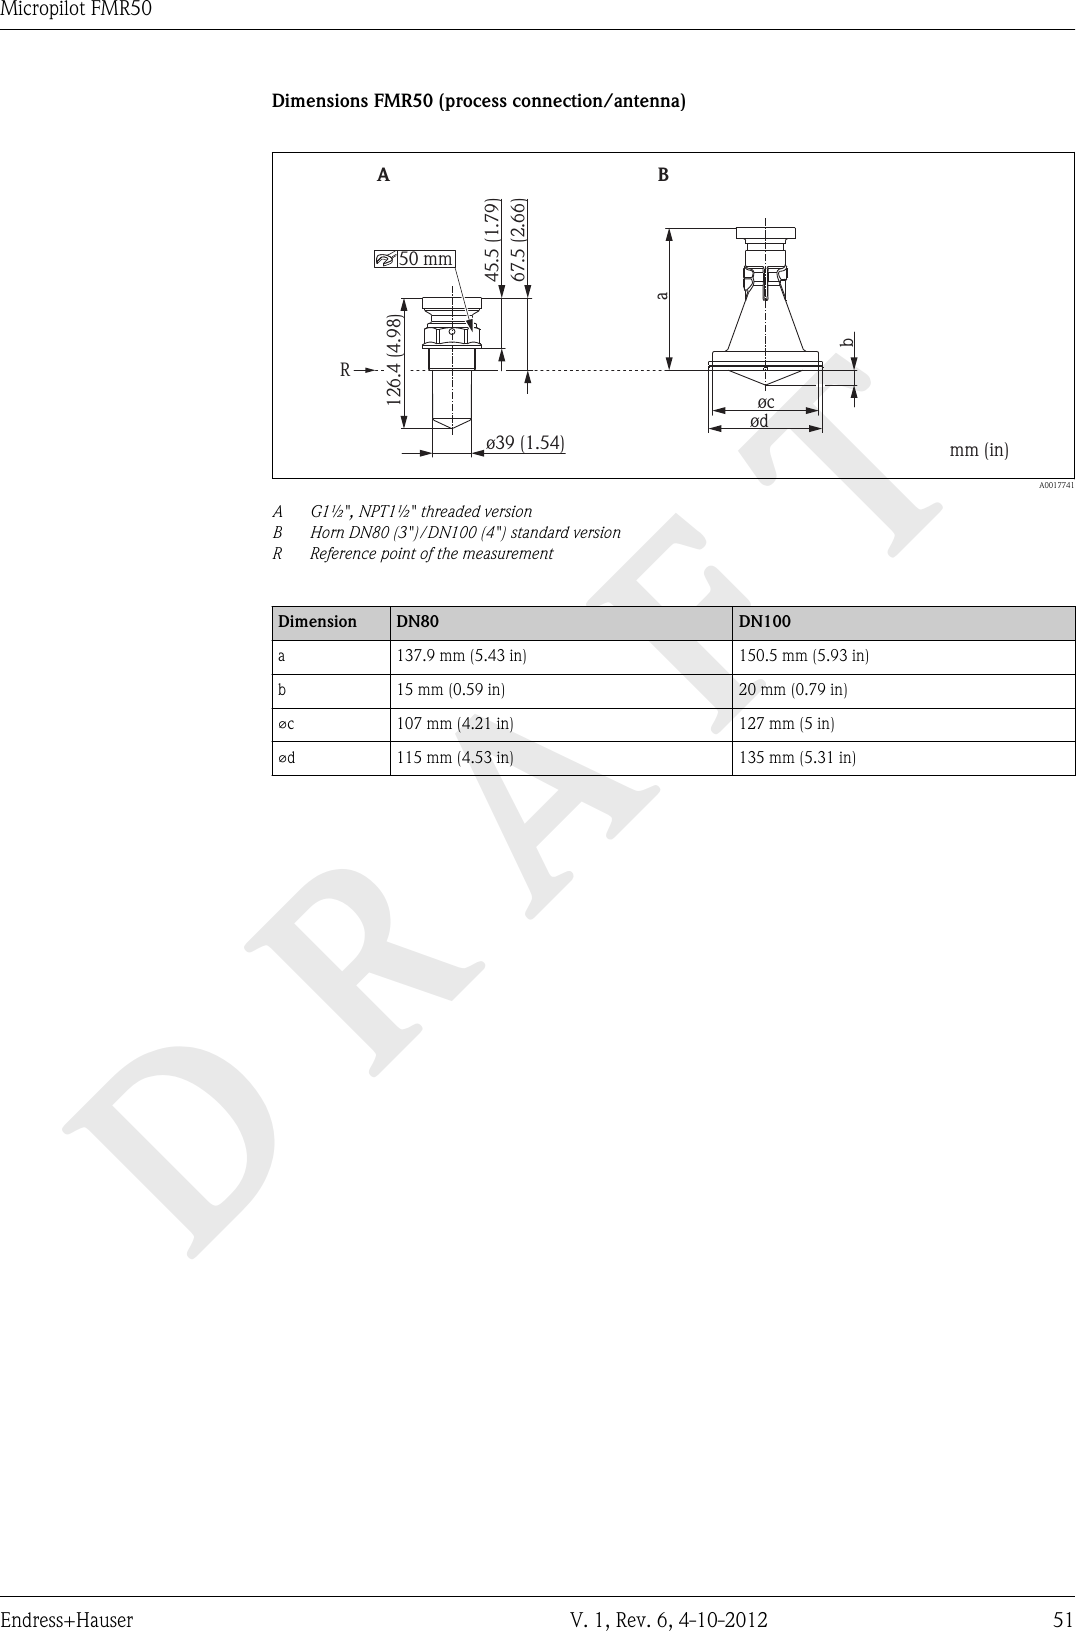 DRAFTMicropilot FMR50Endress+Hauser V. 1, Rev. 6, 4-10-2012 51Dimensions FMR50 (process connection/antenna)Rø39 (1.54)A B126.4 (4.98)67.5 (2.66)45.5 (1.79)50 mmødmm (in)øcba  A0017741AG1½&quot;, NPT1½&quot; threaded versionB Horn DN80 (3&quot;)/DN100 (4&quot;) standard versionR Reference point of the measurementDimension DN80 DN100a 137.9 mm (5.43 in) 150.5 mm (5.93 in)b 15 mm (0.59 in) 20 mm (0.79 in)⌀c 107 mm (4.21 in) 127 mm (5 in)⌀d 115 mm (4.53 in) 135 mm (5.31 in)